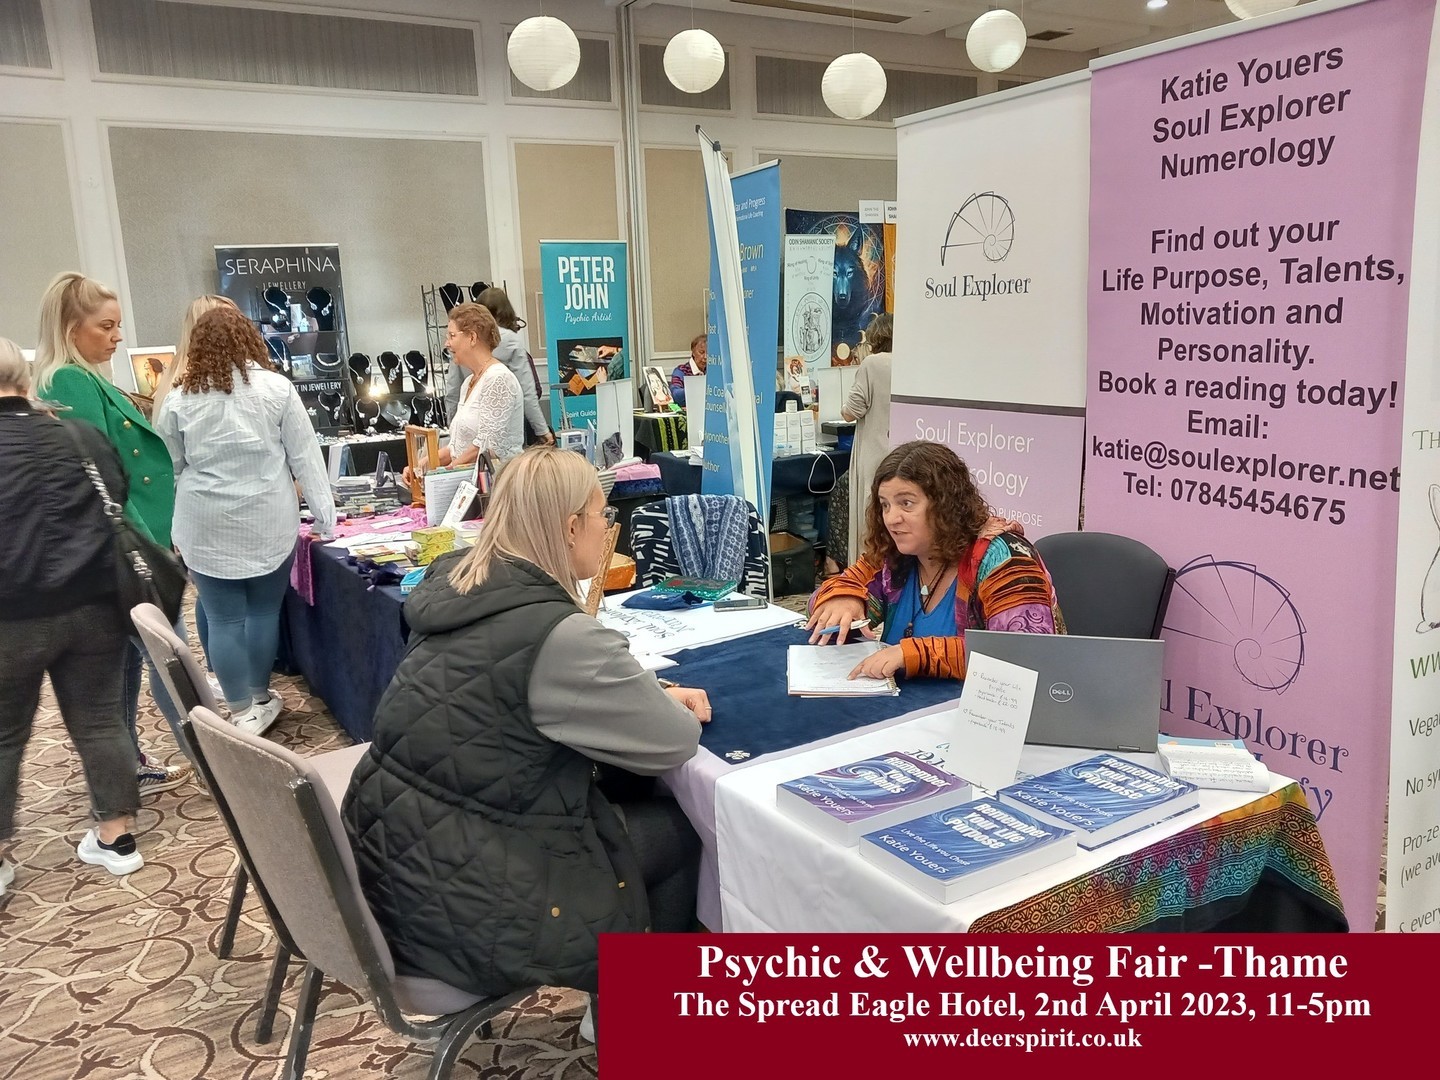 Psychic and Wellbeing Fair - Thame, Thame, England, United Kingdom